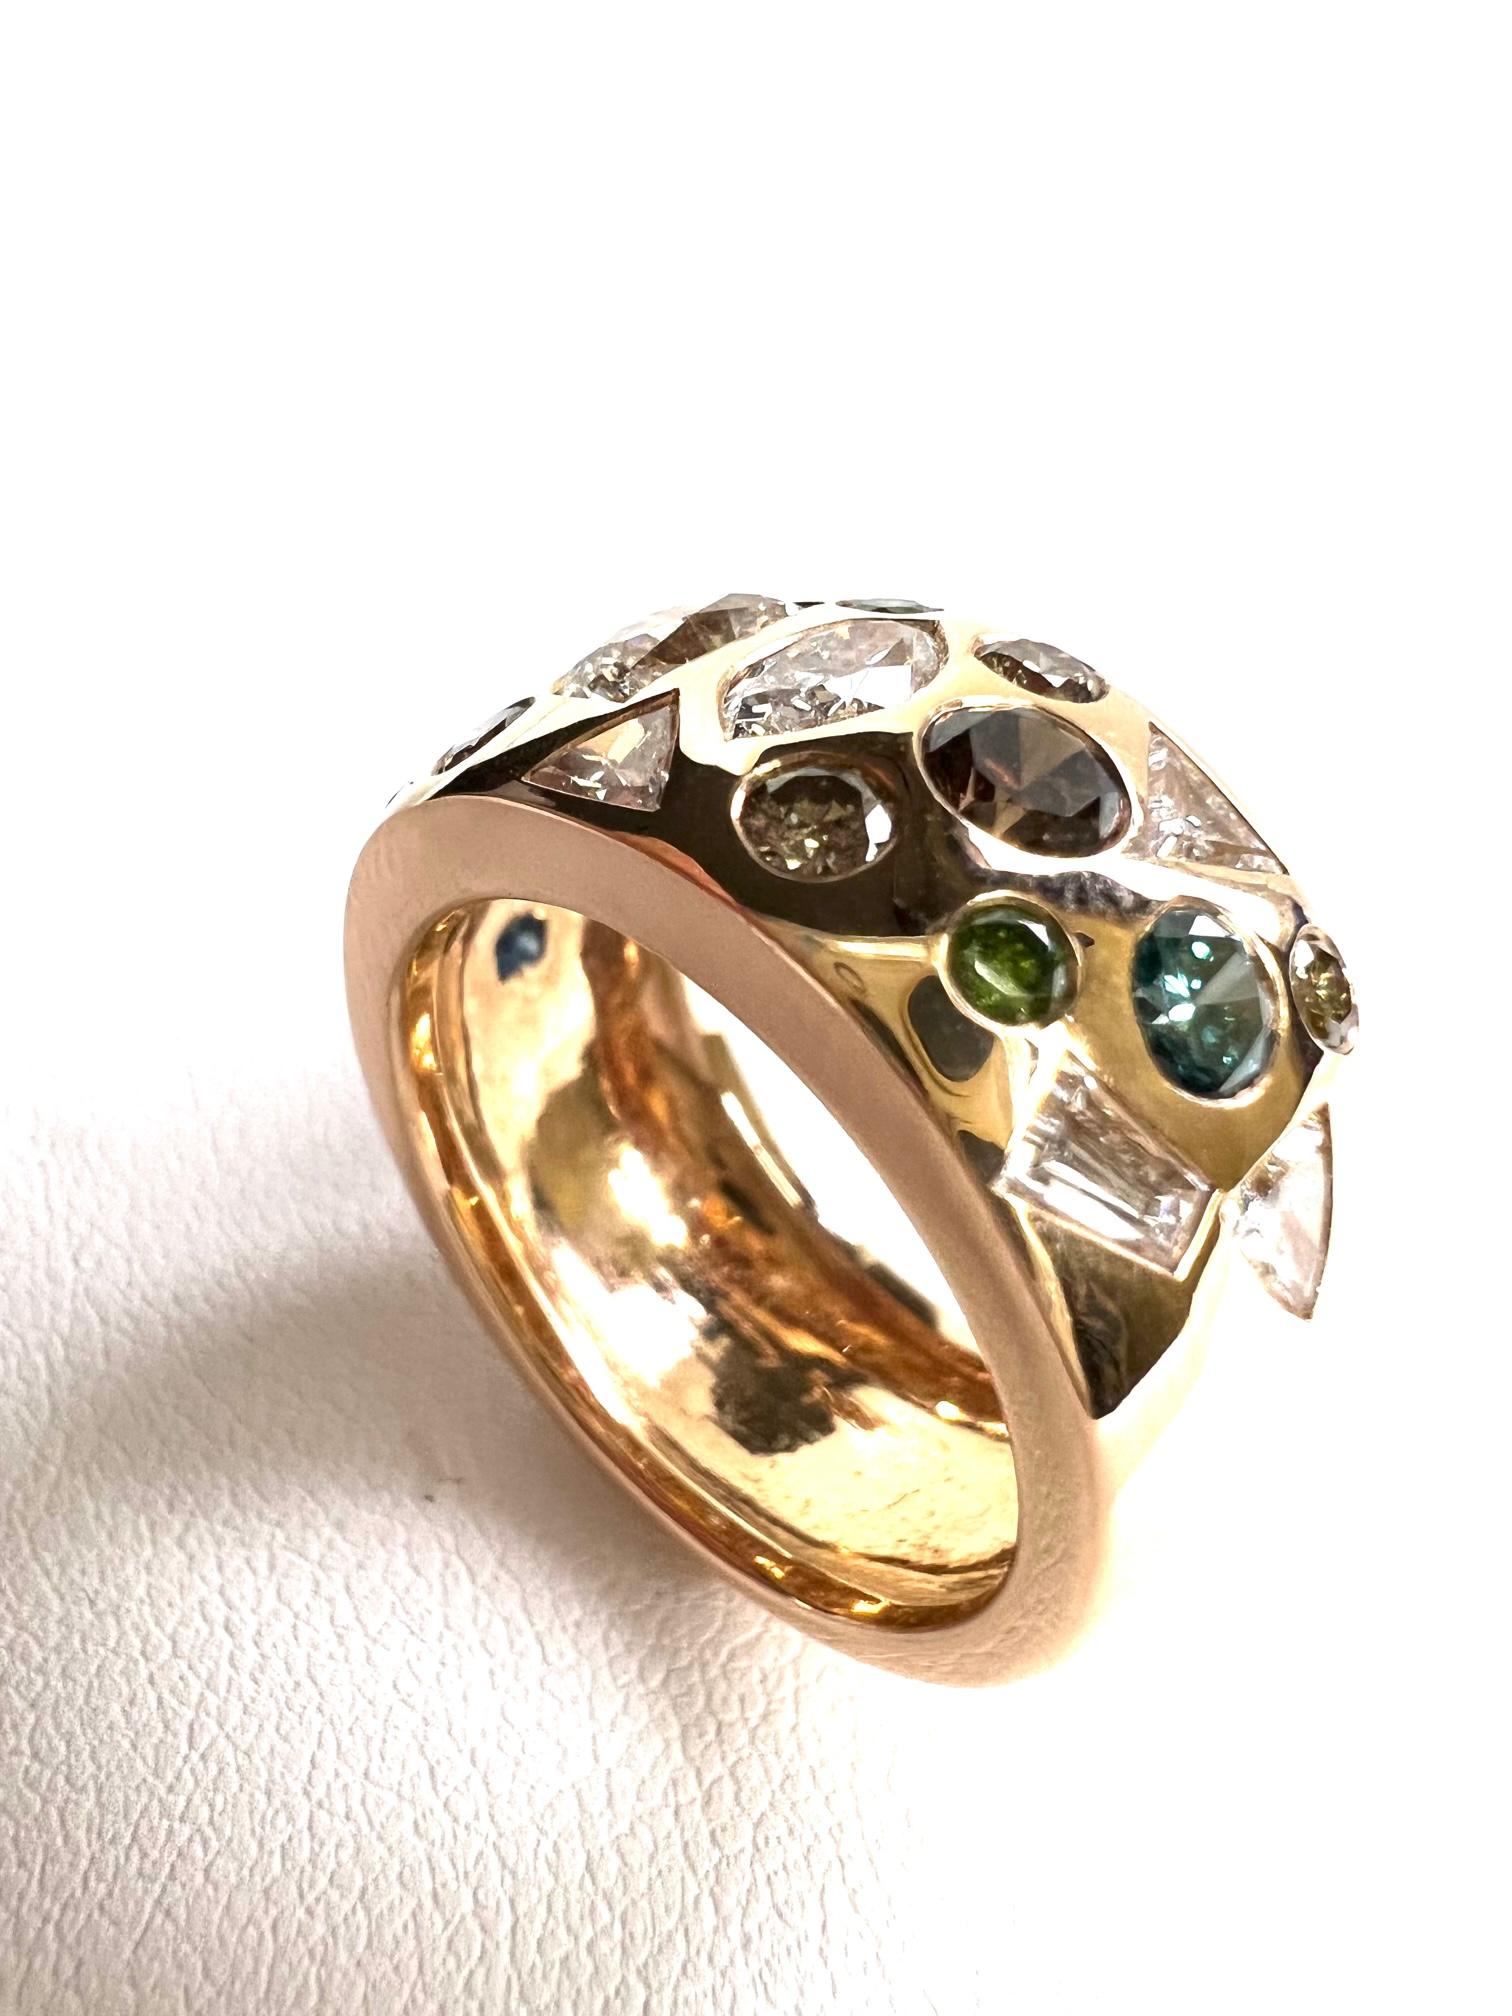 Thomas Leyser is renowned for his contemporary jewellery designs utilizing fine gemstones.

1 ring in 18k red gold 13,2gr. with 14 round diamonds white + fancy color + 9 diamonds fancy shapes and colors 2,85cts. 

Ringsize 56 (7,5). Is resizeable.

 